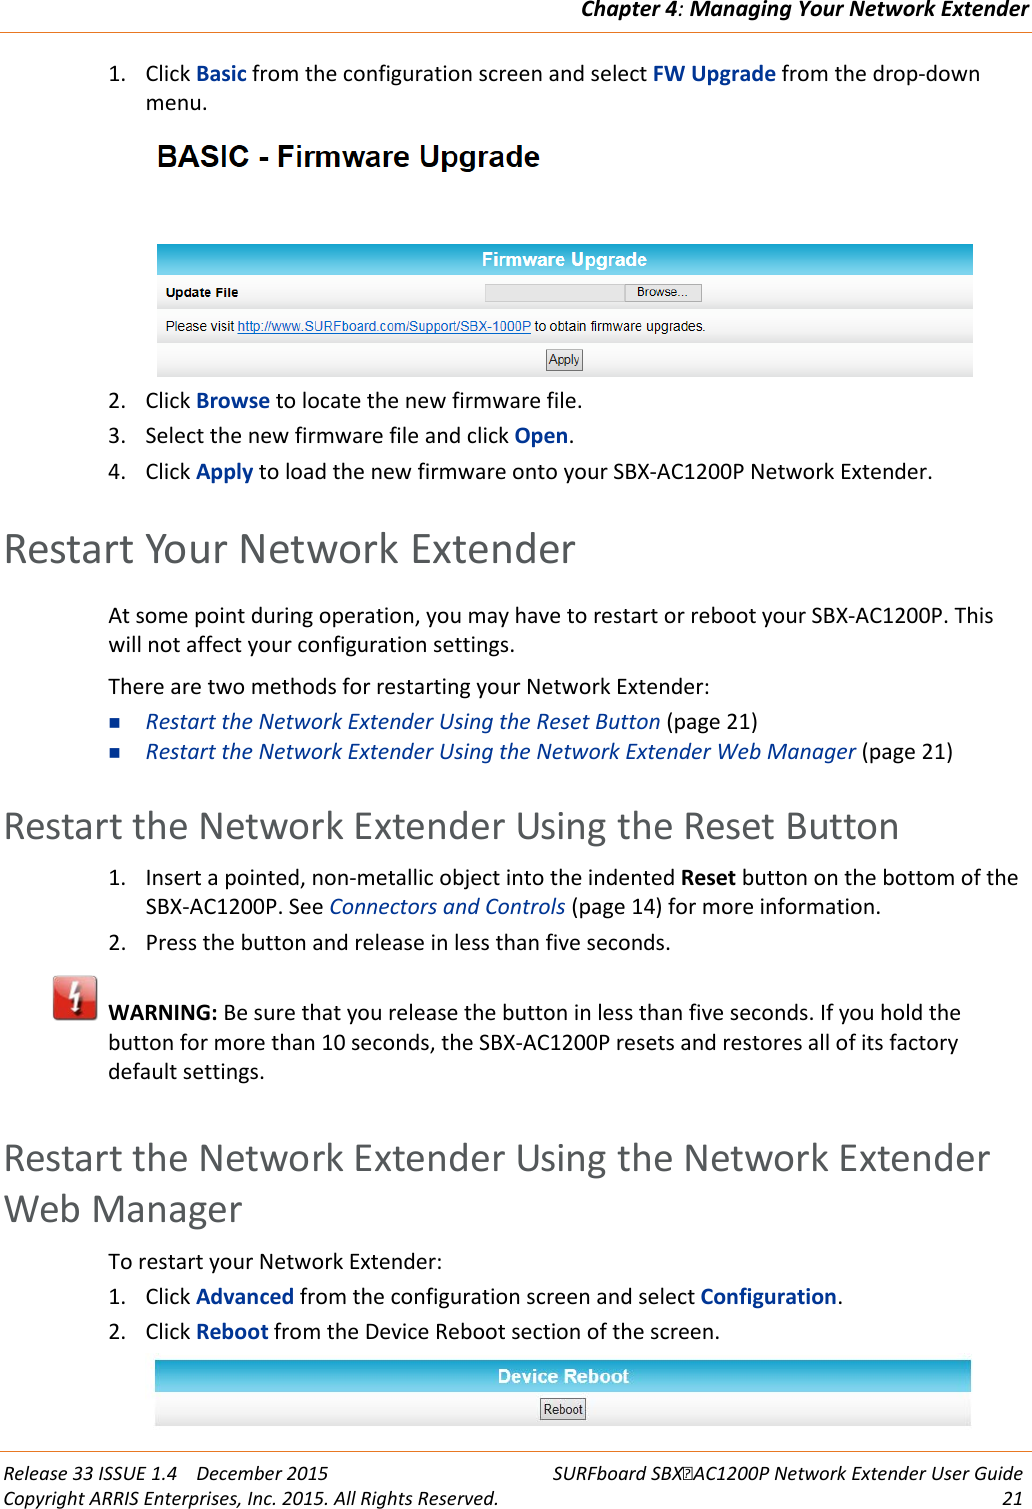 Chapter 4: Managing Your Network Extender  Release 33 ISSUE 1.4    December 2015 SURFboard SBXAC1200P Network Extender User Guide Copyright ARRIS Enterprises, Inc. 2015. All Rights Reserved. 21  1. Click Basic from the configuration screen and select FW Upgrade from the drop-down menu.  2. Click Browse to locate the new firmware file. 3. Select the new firmware file and click Open. 4. Click Apply to load the new firmware onto your SBX-AC1200P Network Extender.   Restart Your Network Extender At some point during operation, you may have to restart or reboot your SBX-AC1200P. This will not affect your configuration settings. There are two methods for restarting your Network Extender:  Restart the Network Extender Using the Reset Button (page 21)  Restart the Network Extender Using the Network Extender Web Manager (page 21)   Restart the Network Extender Using the Reset Button 1. Insert a pointed, non-metallic object into the indented Reset button on the bottom of the SBX-AC1200P. See Connectors and Controls (page 14) for more information. 2. Press the button and release in less than five seconds.  WARNING: Be sure that you release the button in less than five seconds. If you hold the button for more than 10 seconds, the SBX-AC1200P resets and restores all of its factory default settings.   Restart the Network Extender Using the Network Extender Web Manager To restart your Network Extender: 1. Click Advanced from the configuration screen and select Configuration. 2. Click Reboot from the Device Reboot section of the screen.  